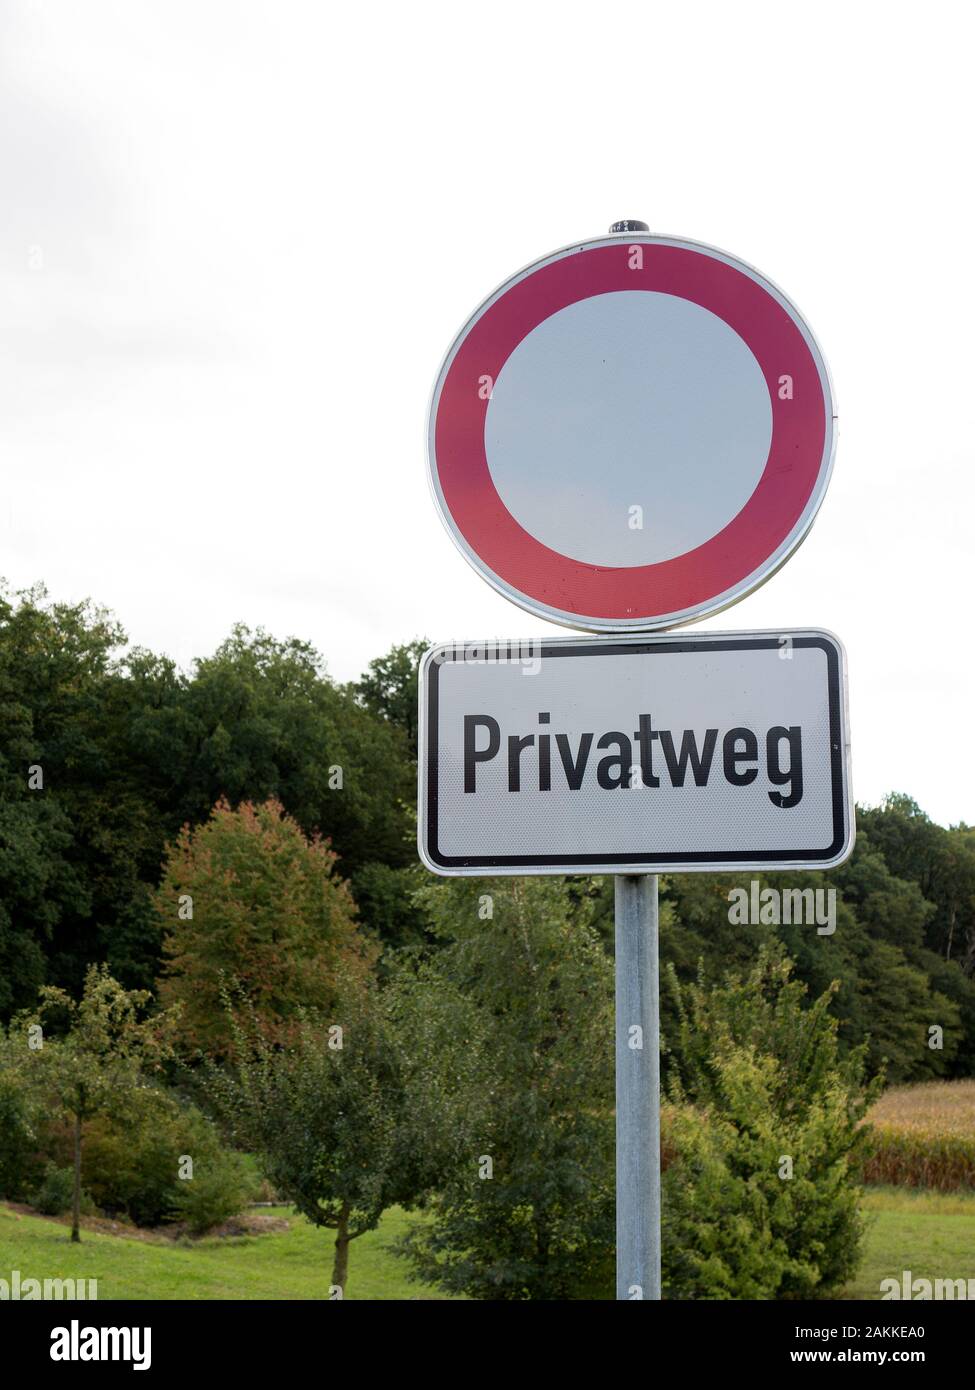 Traffic sign with German text 'Privatweg' translates into 'Private road' in English language Stock Photo